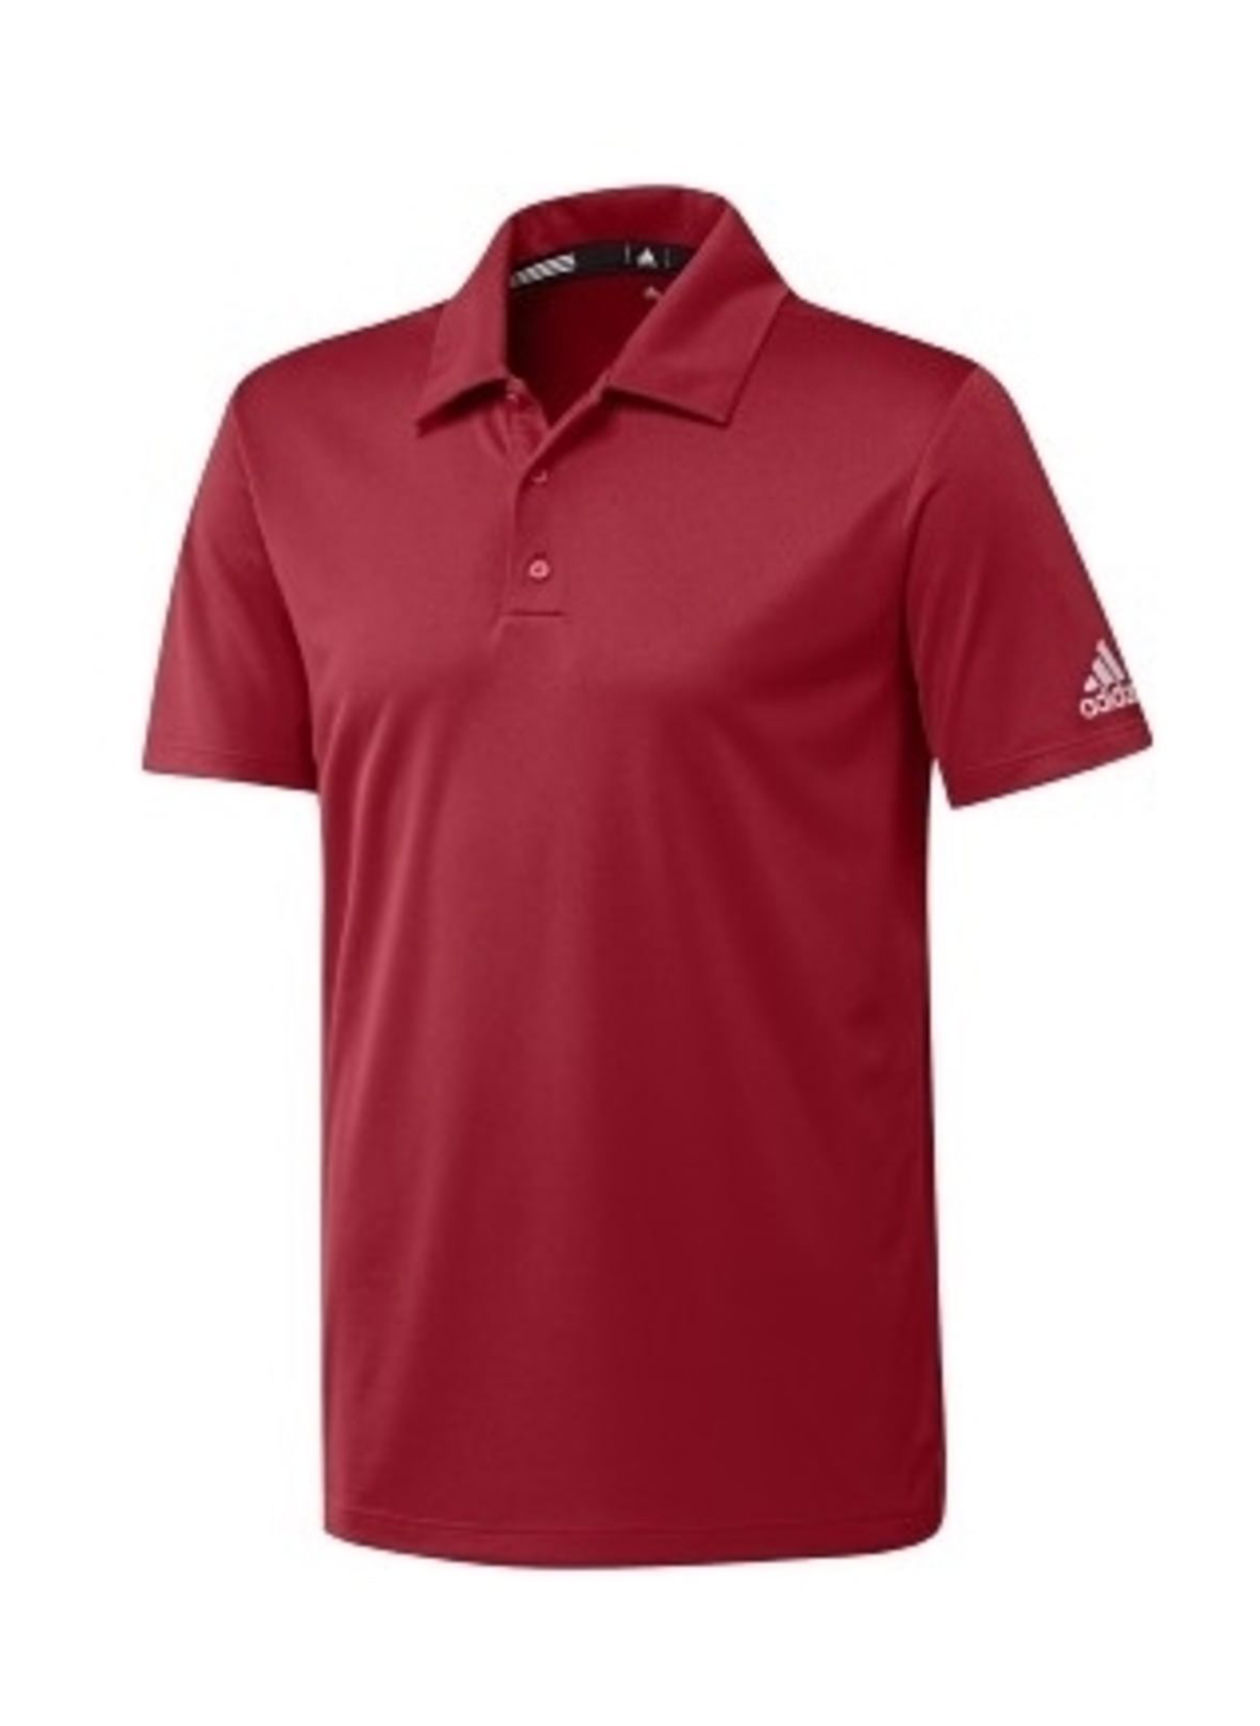 Adidas Men's Red Grind Polo